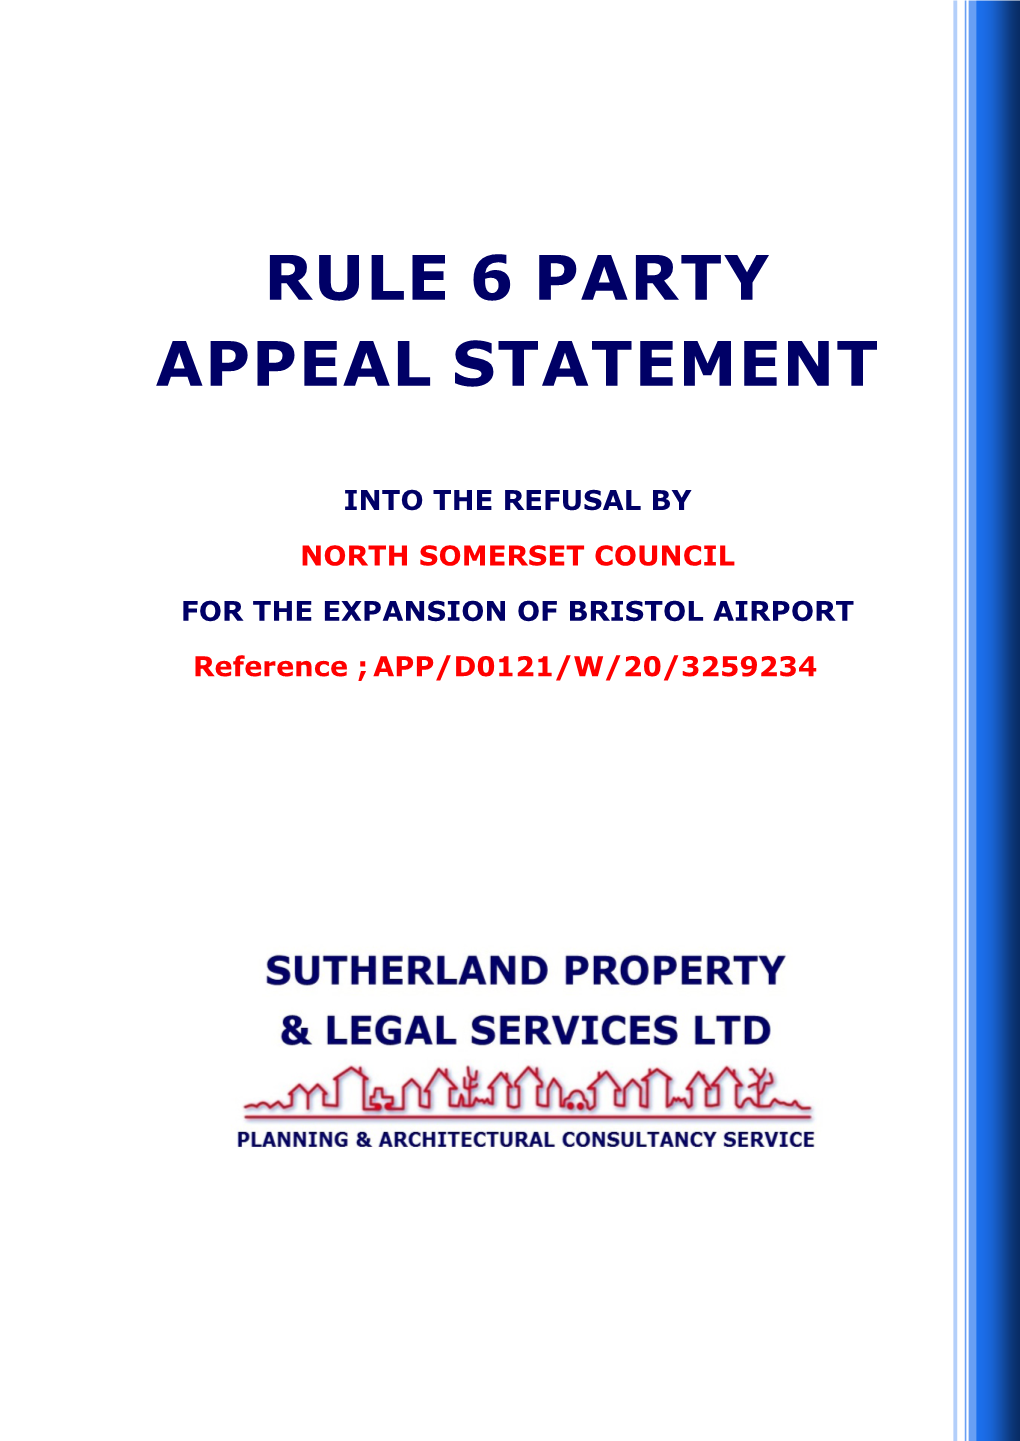 Sutherland Properties and Legal Services